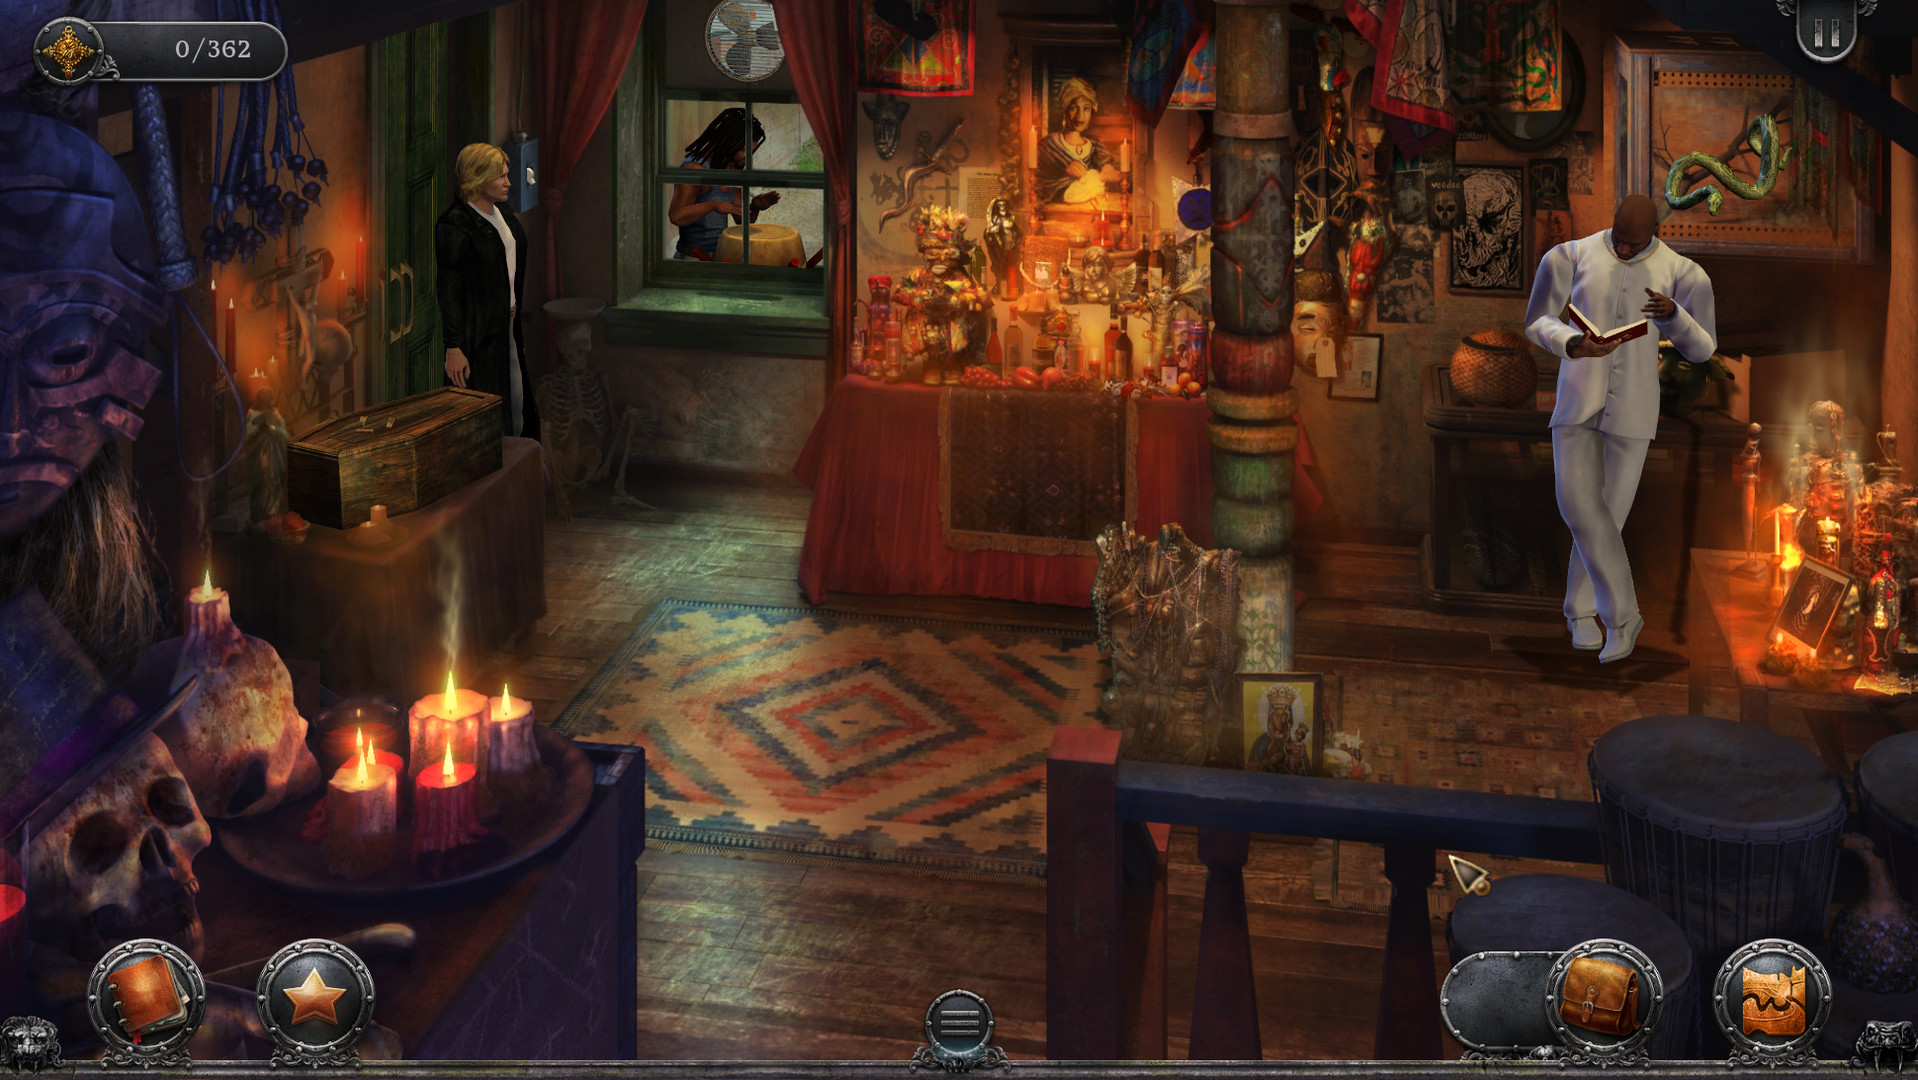 The Historic Voodoo Museum, New Orleans, screenshot in Gabriel Knight adventure game | Inky Squiggles